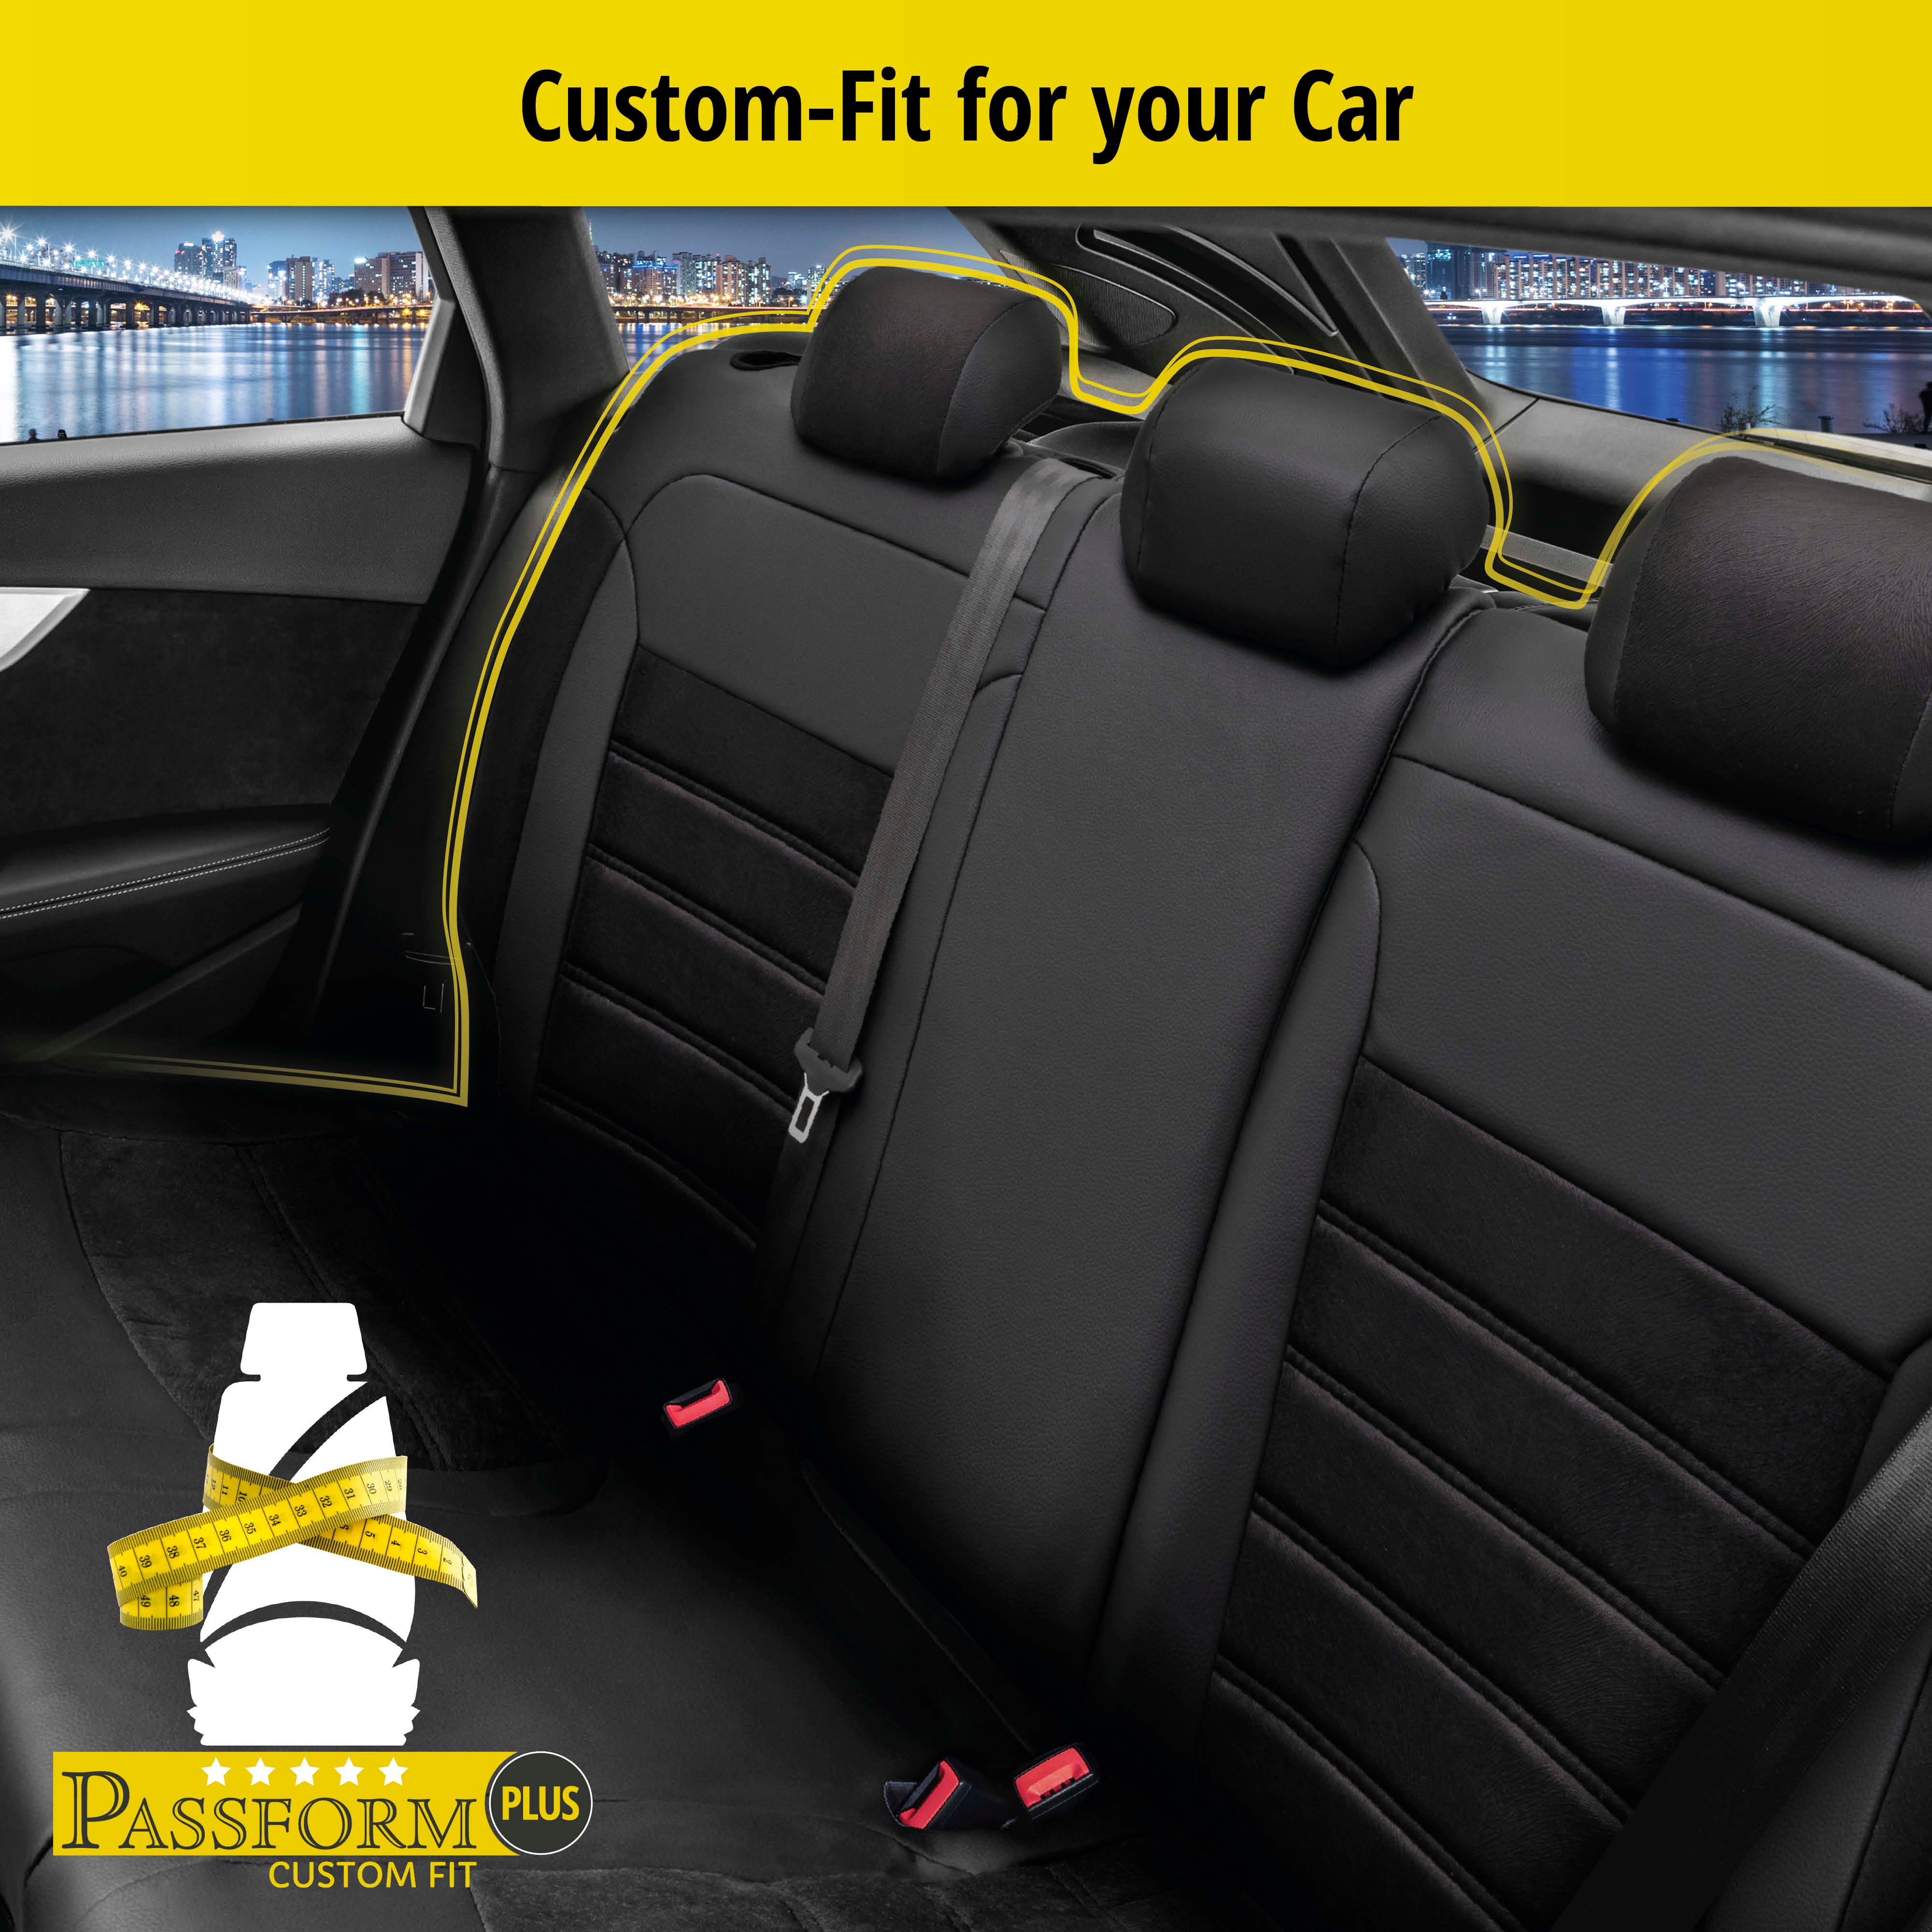 Seat Cover Bari for VW Passat Trendline 2015-Today, 1 rear seat cover for normal seats